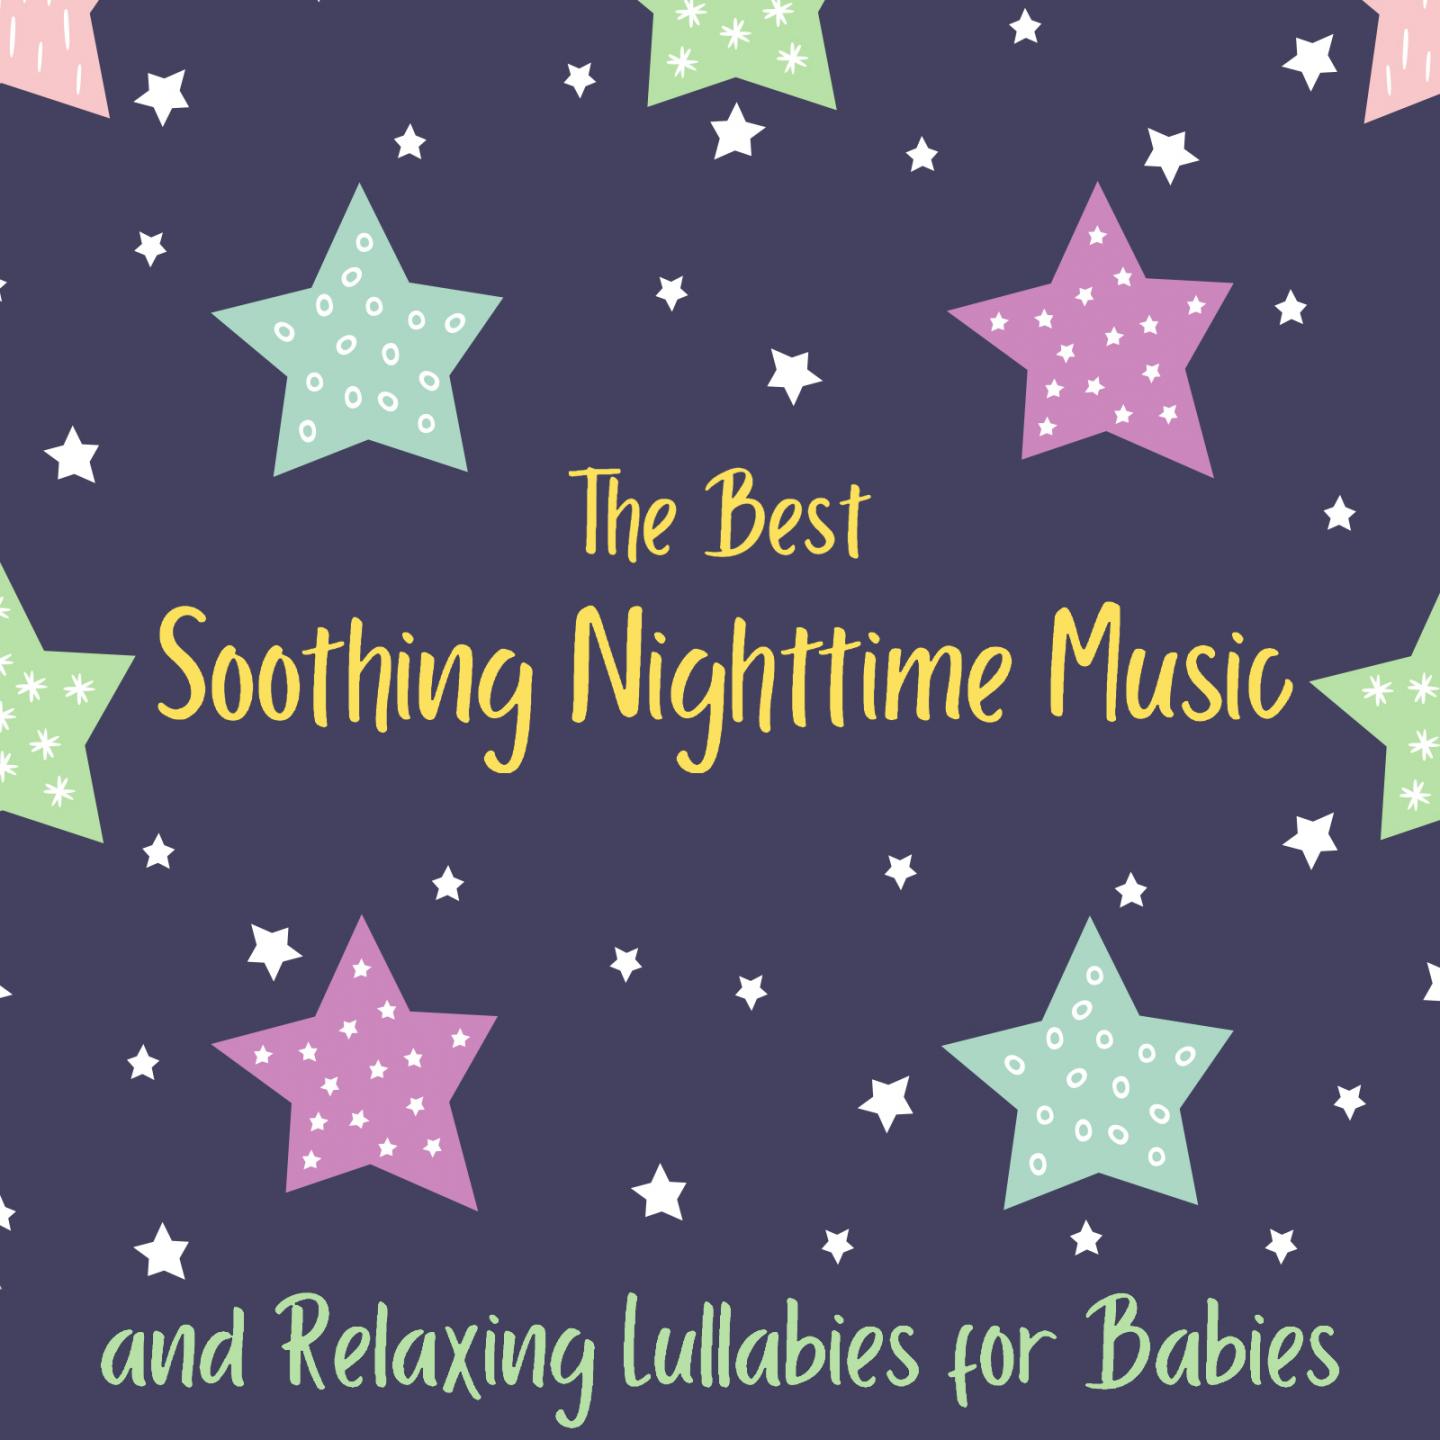 The Best Soothing Nighttime Music and Relaxing Lullabies for Babies